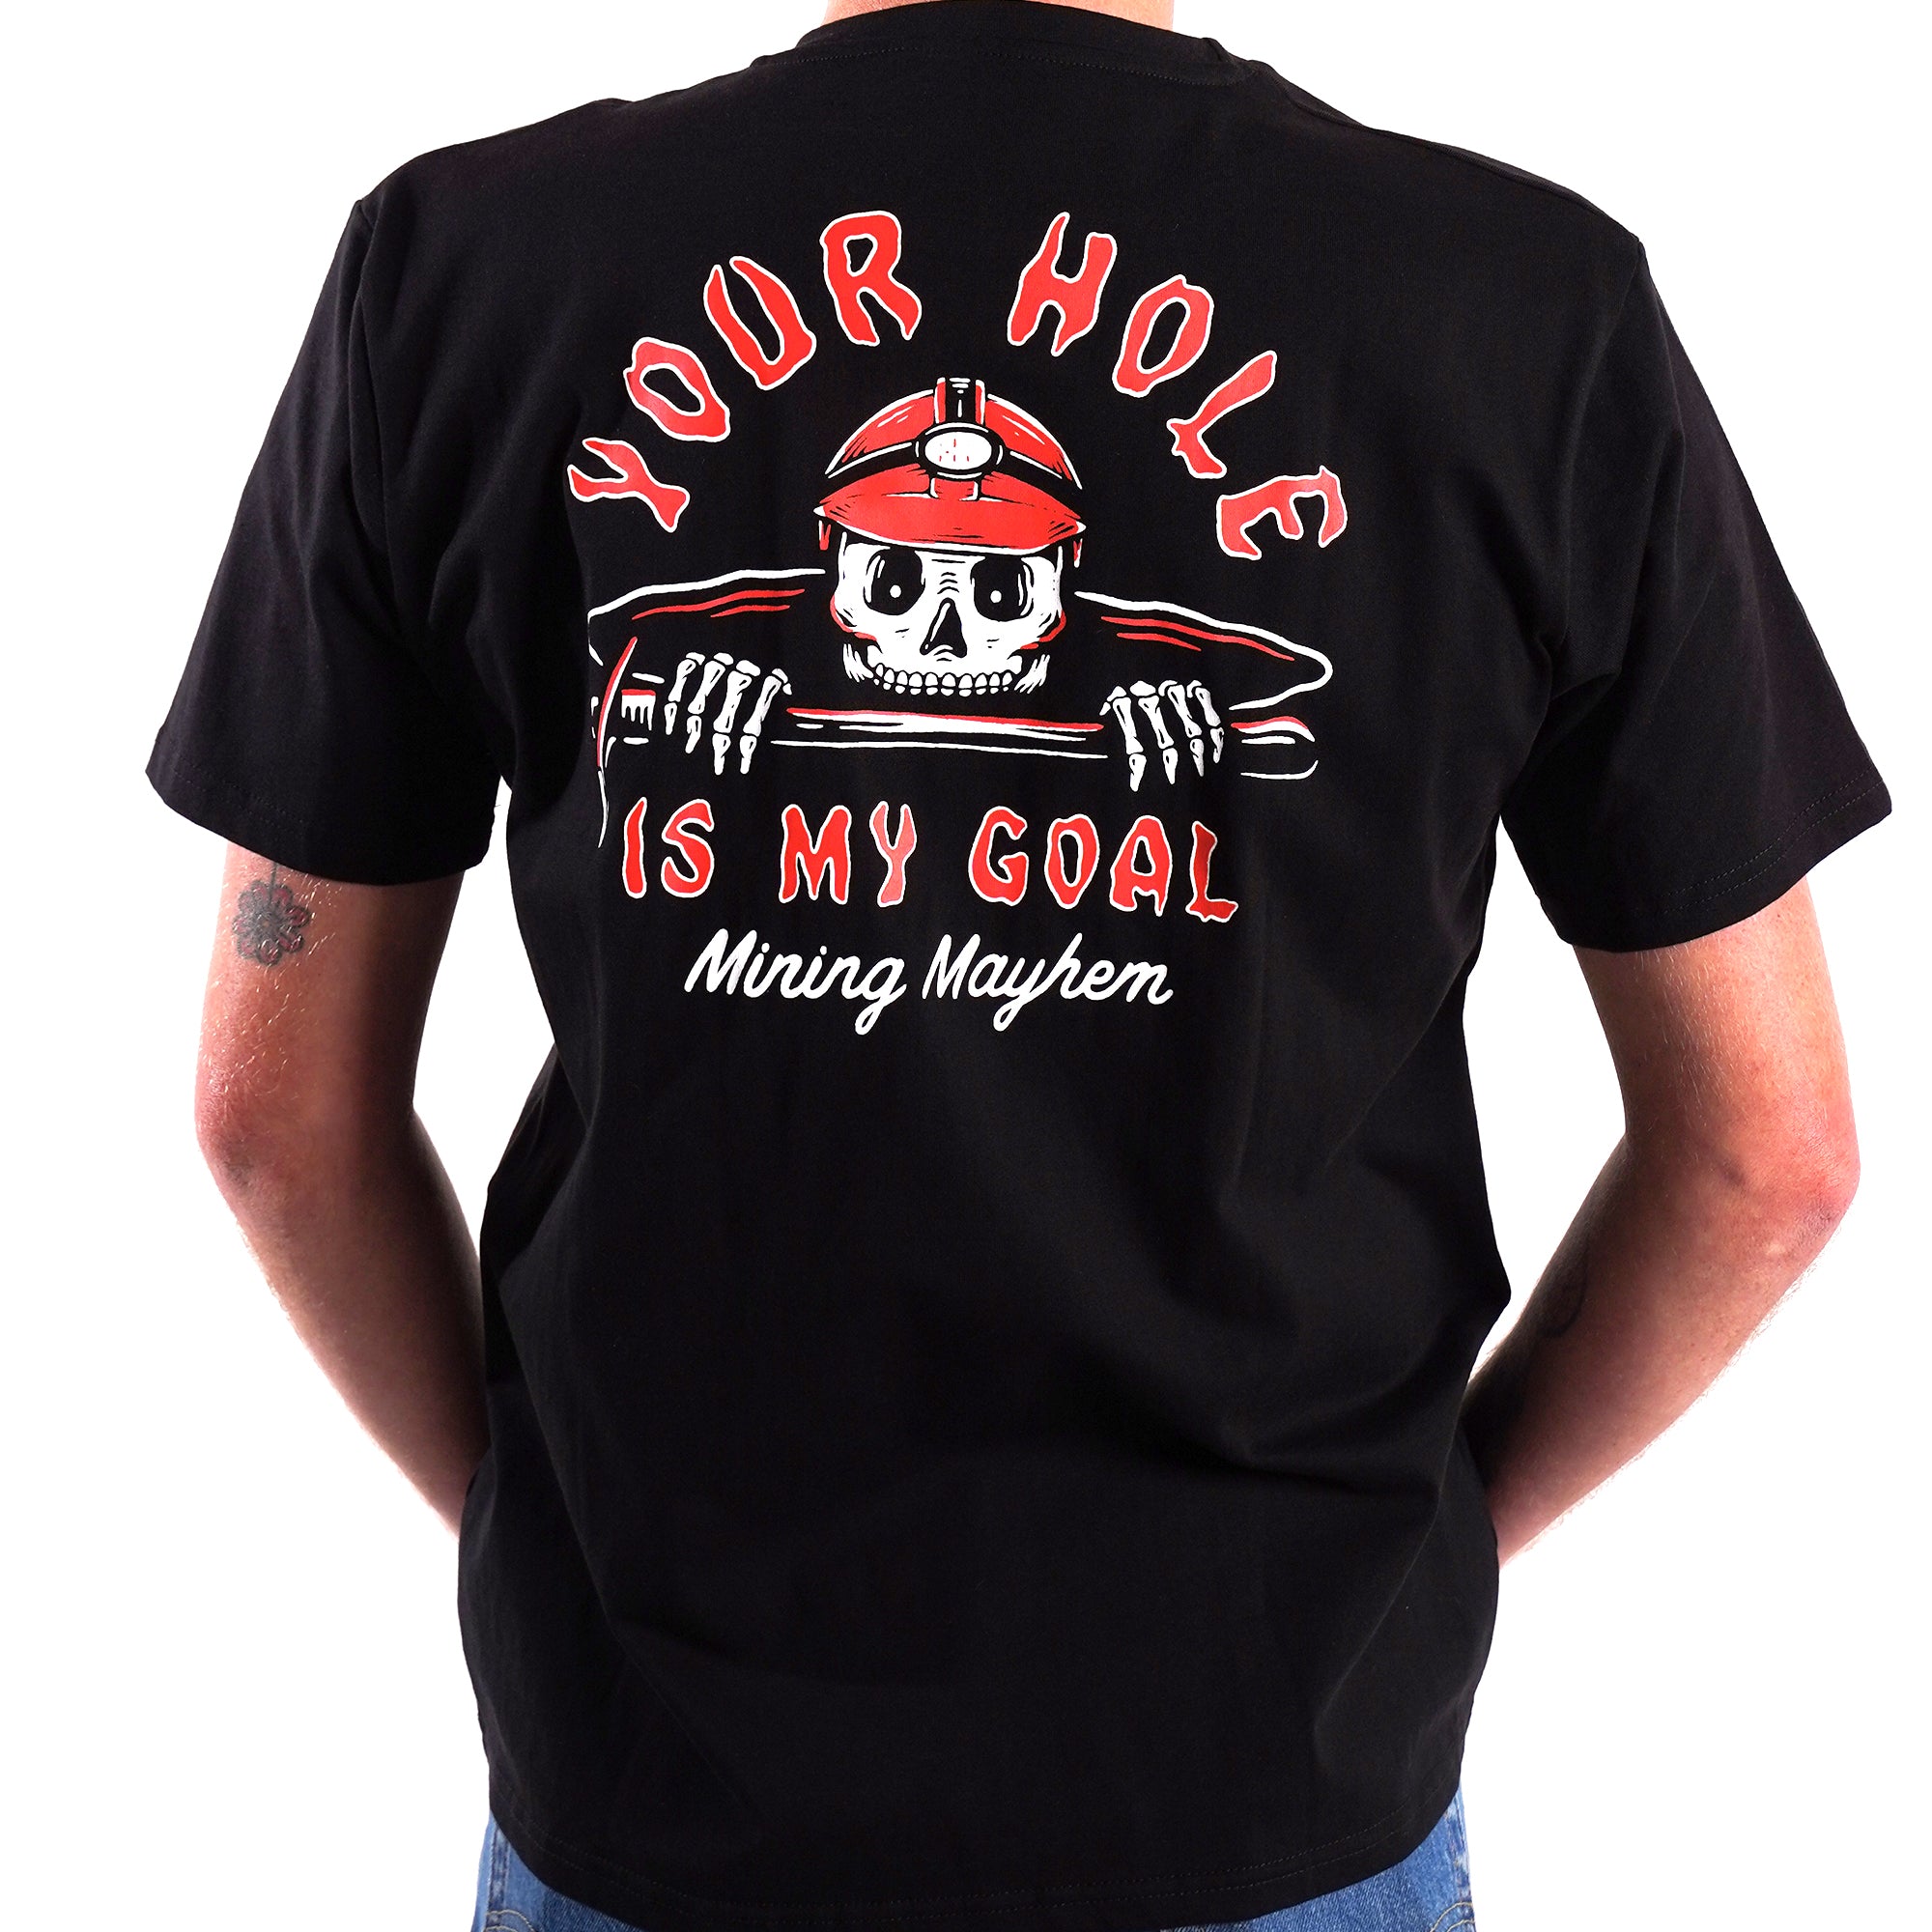 Your Hole Is My Goal - T-Shirt (Black)